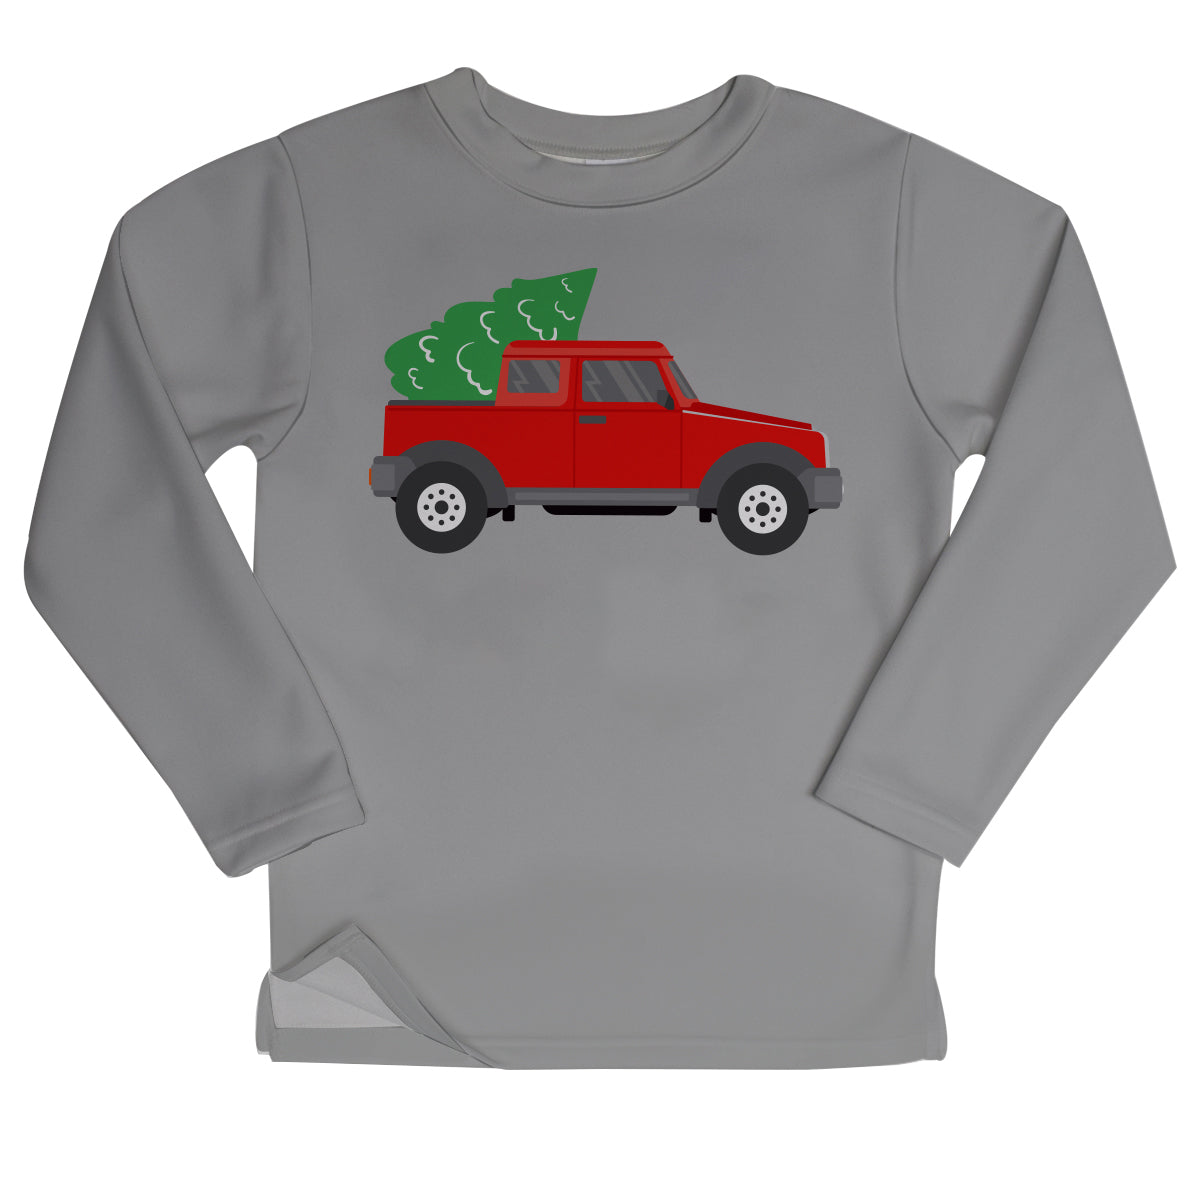 Boys gray and red christmas tree sweatshirt with name - Wimziy&Co.